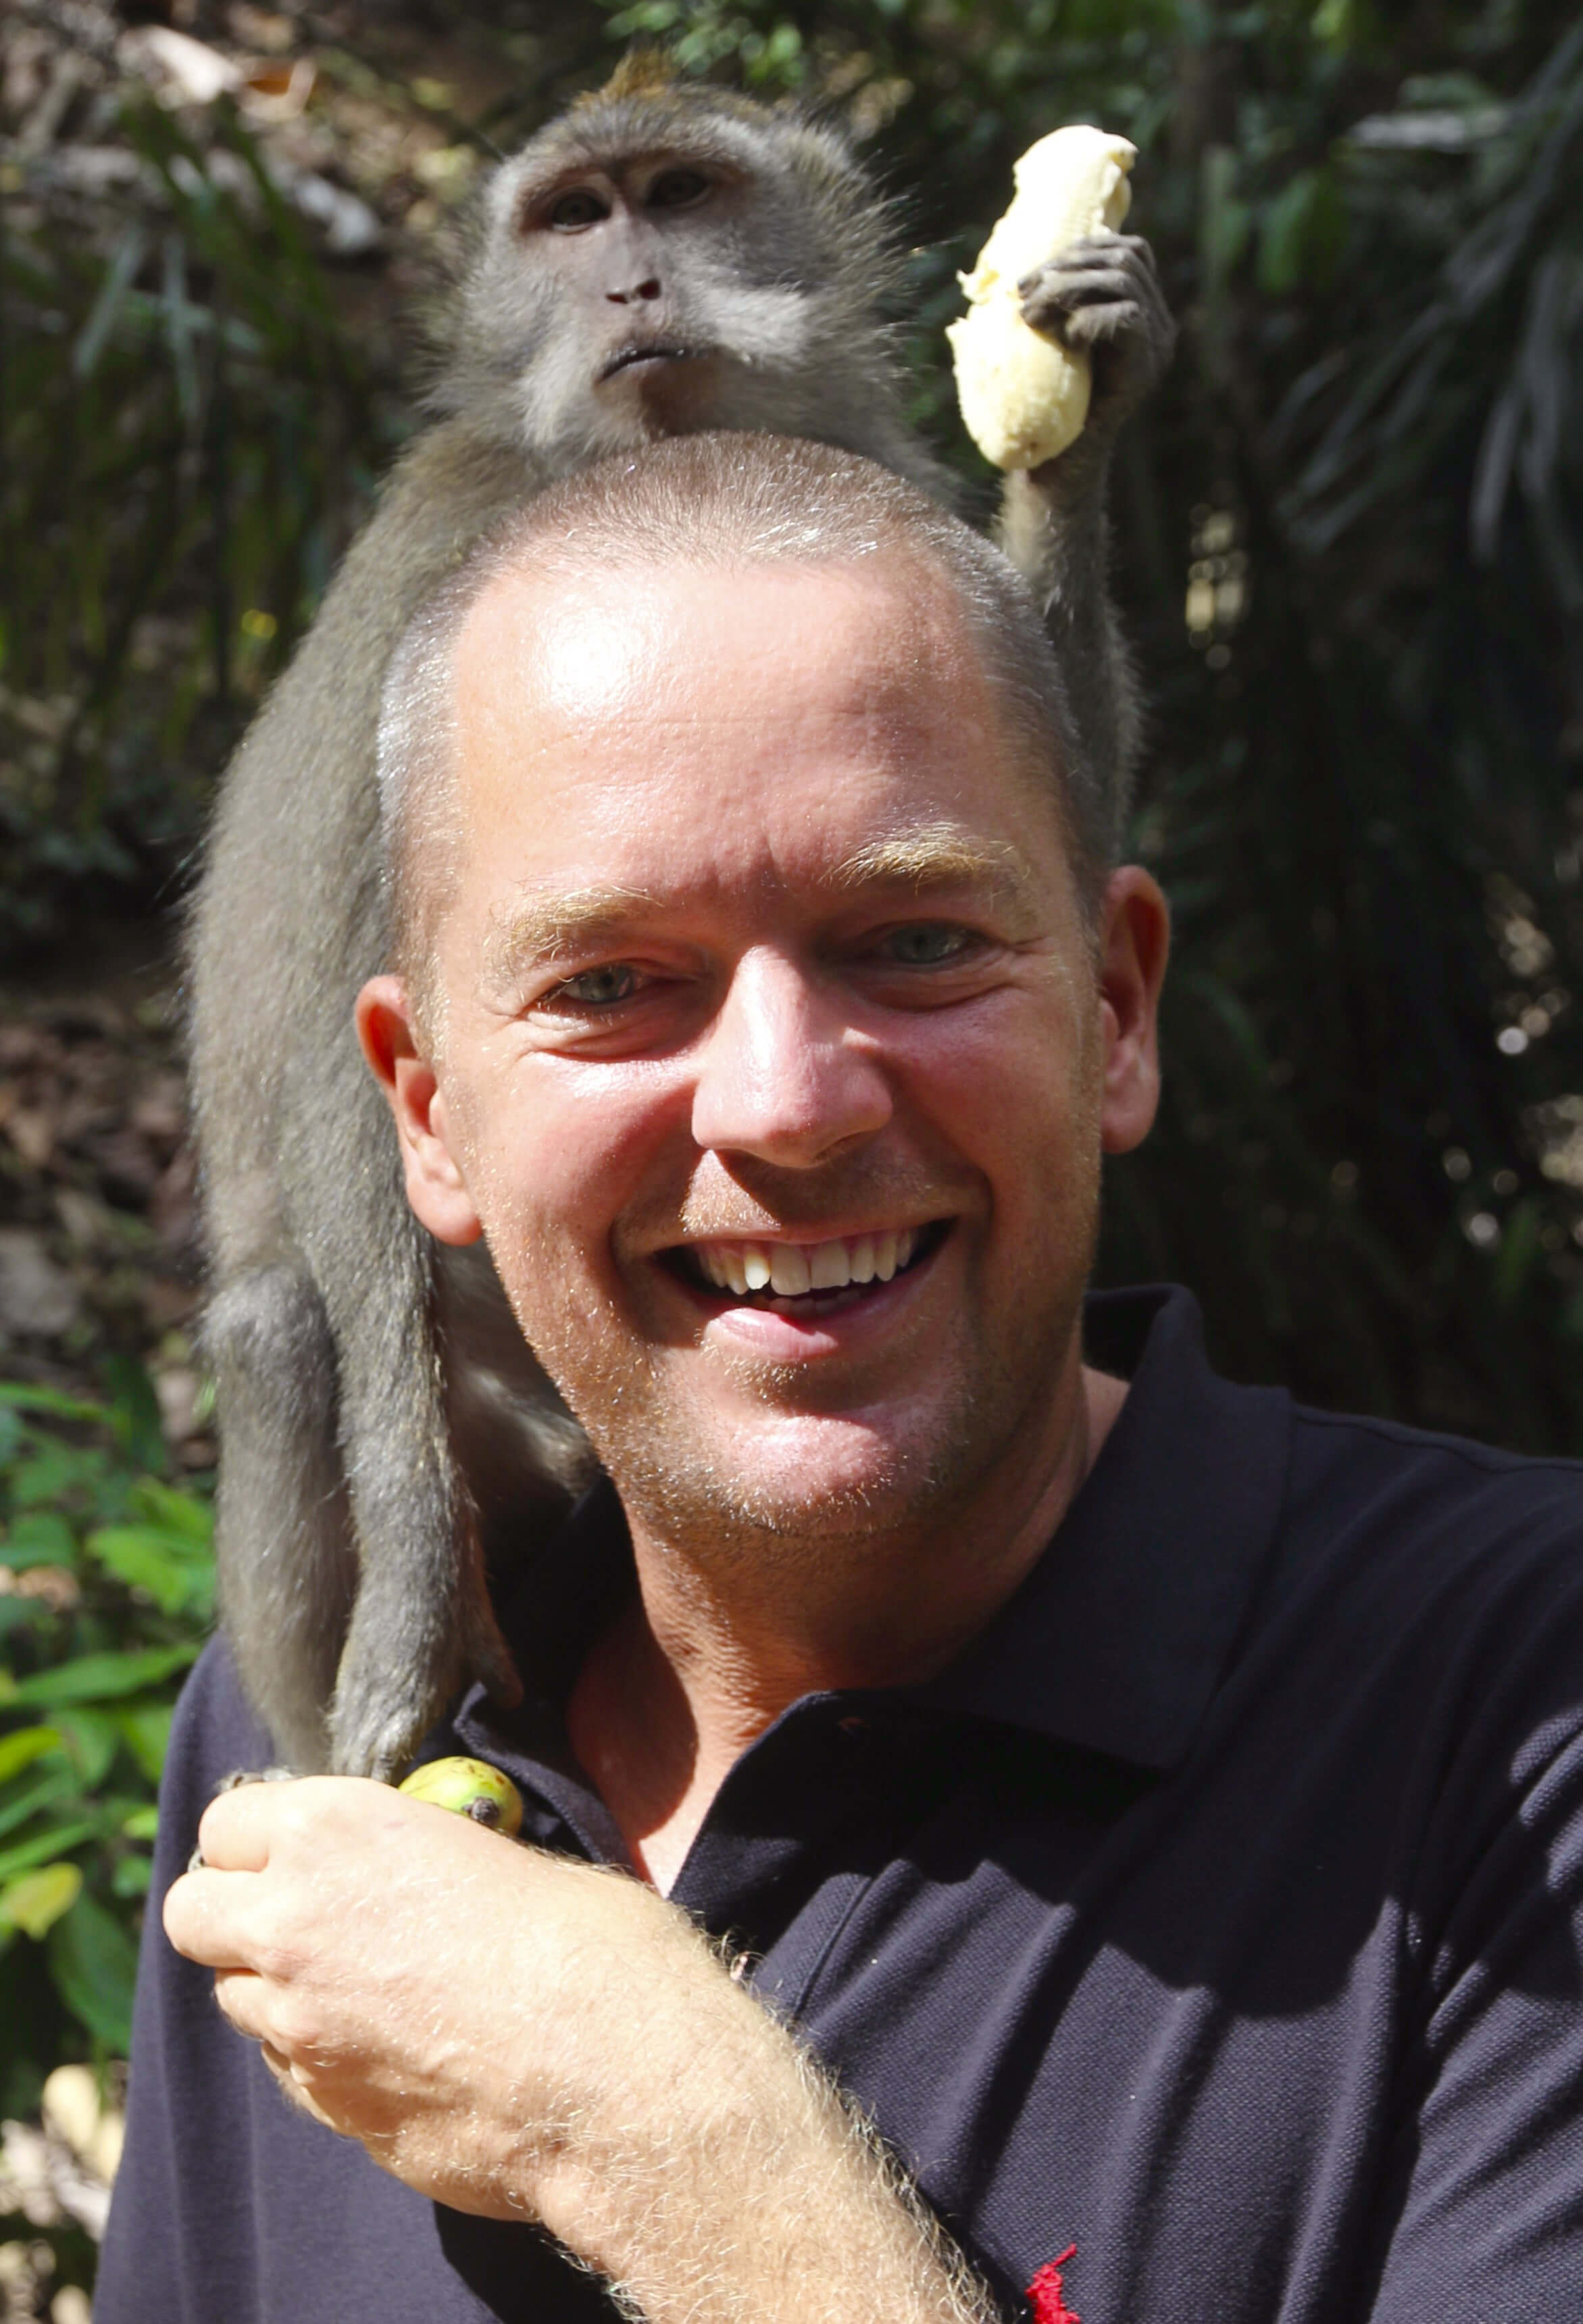 Fritze von Berswordt taking controlled risks with a monkey in Indonesia